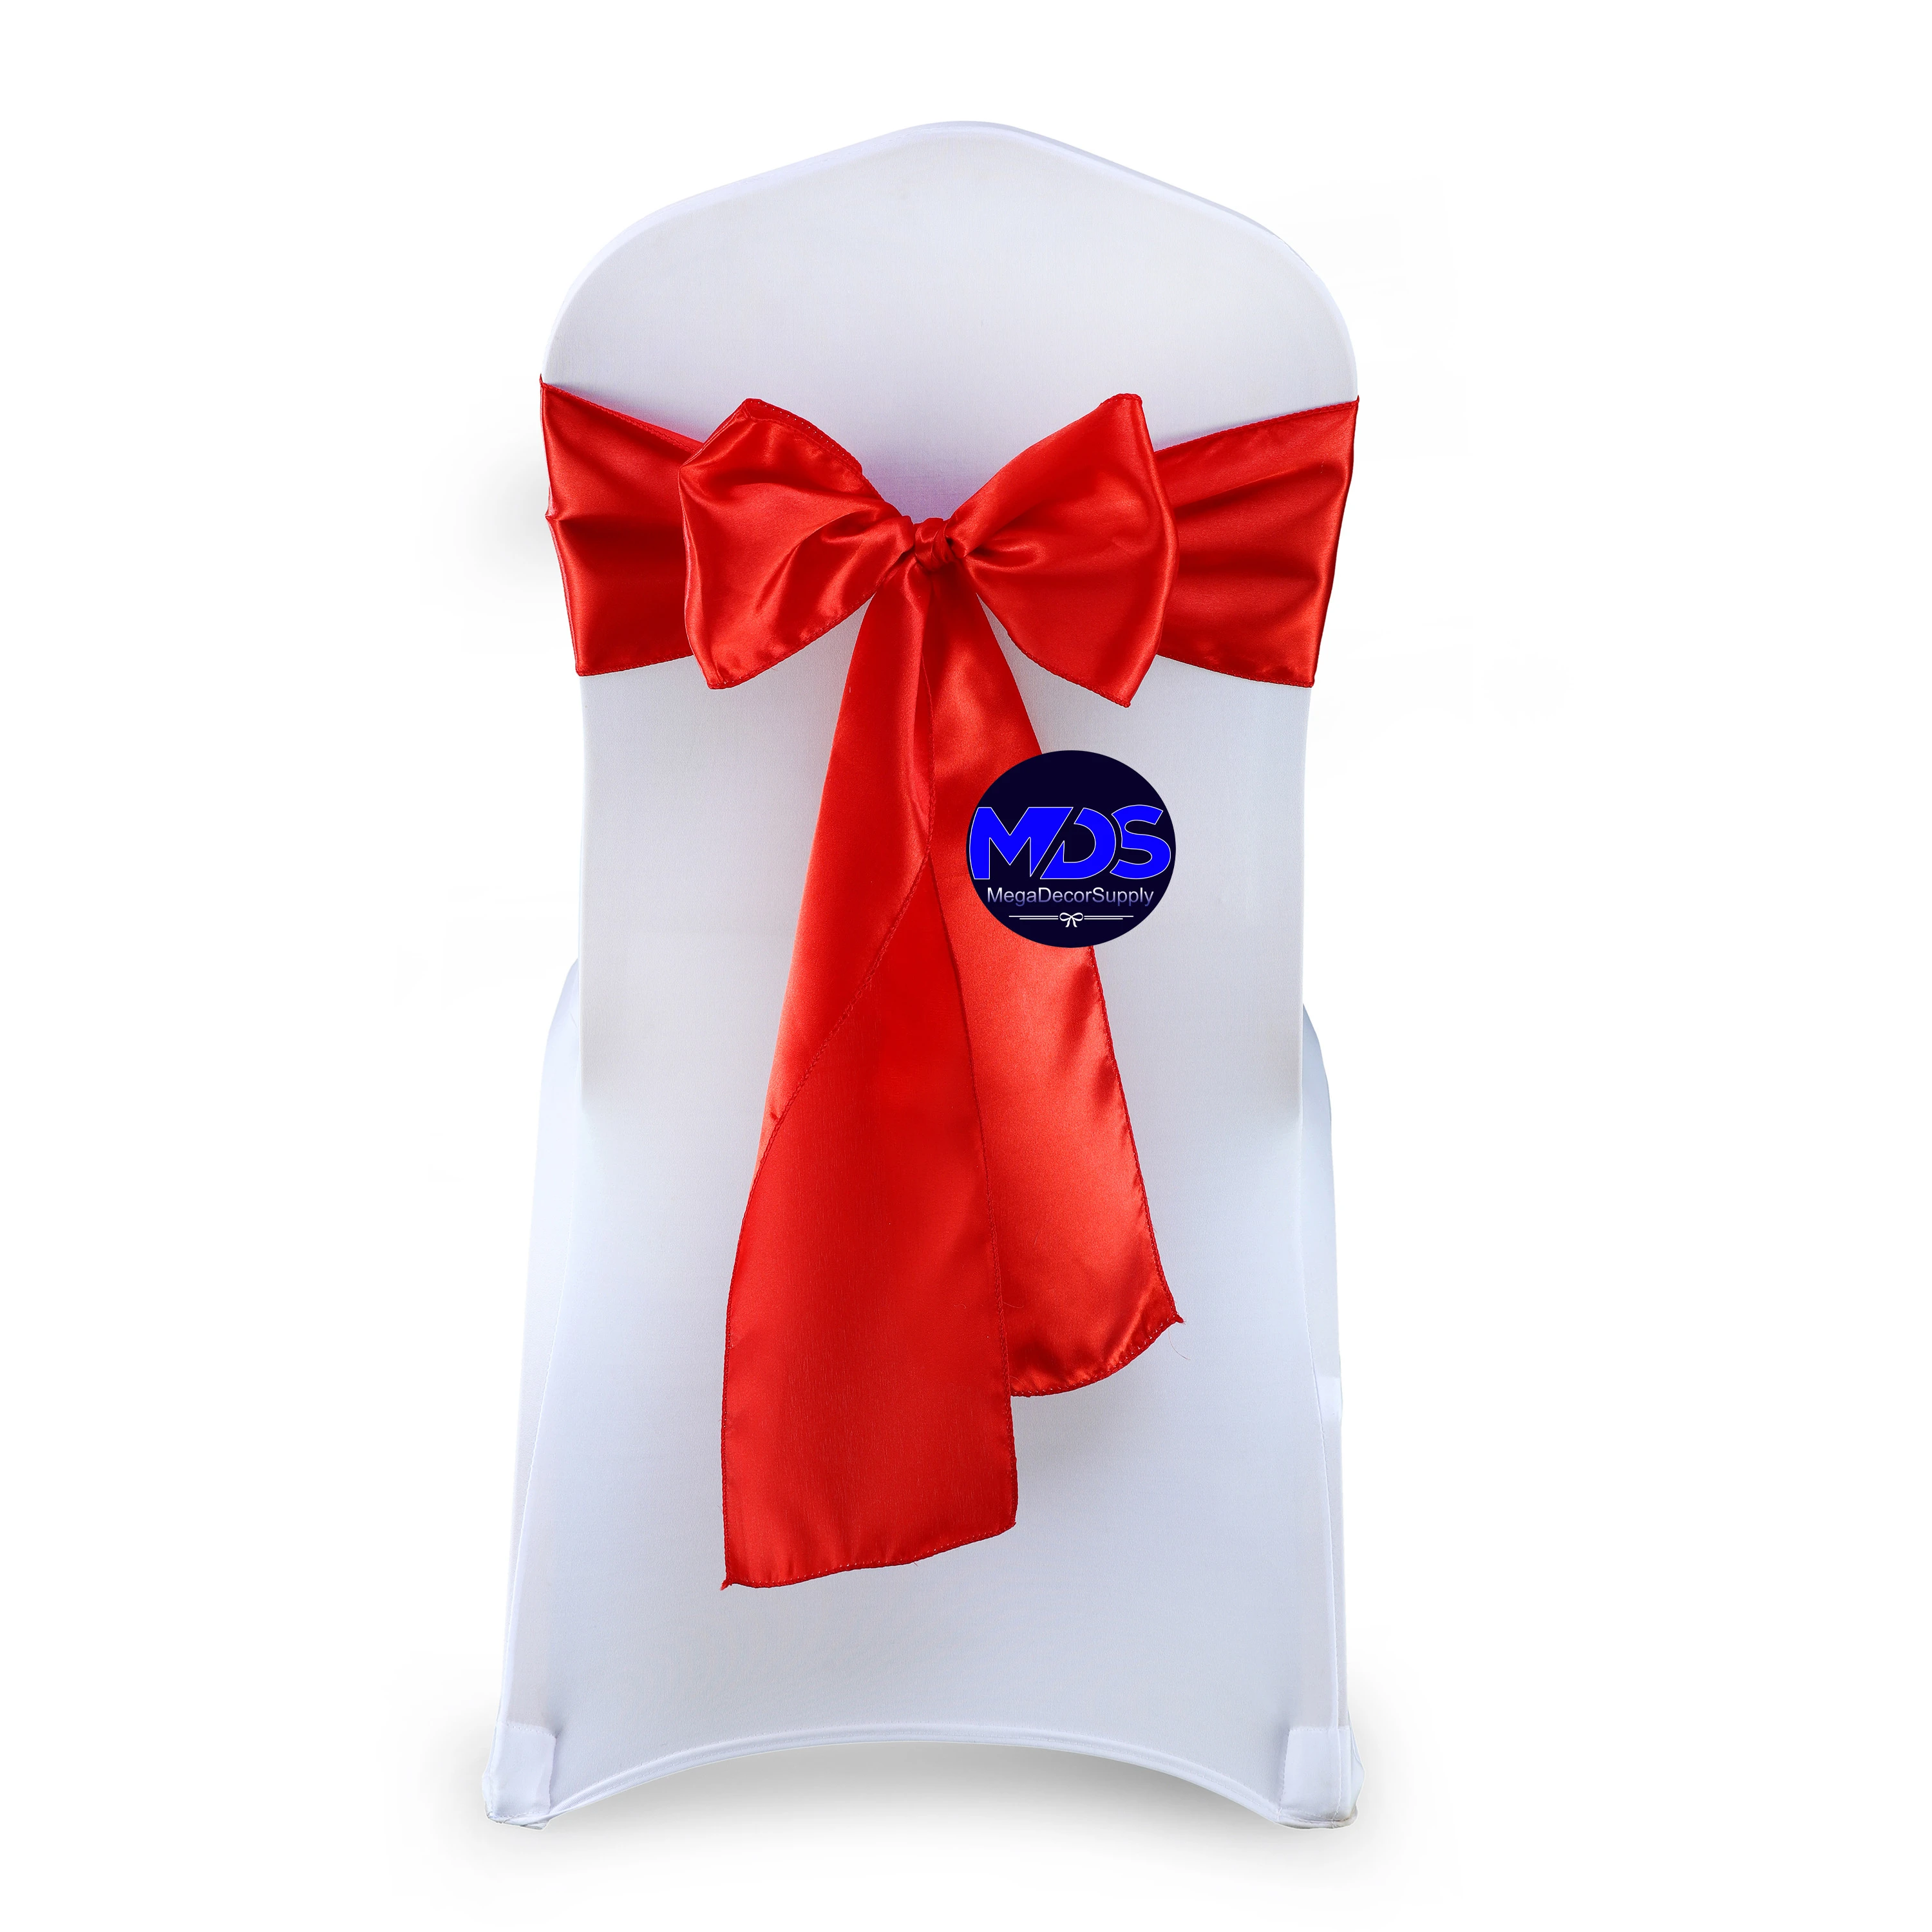 MDS Satin Chair Sashes Bow sash for Wedding and Events Supplies Party Decoration Chair Cover sash - Red